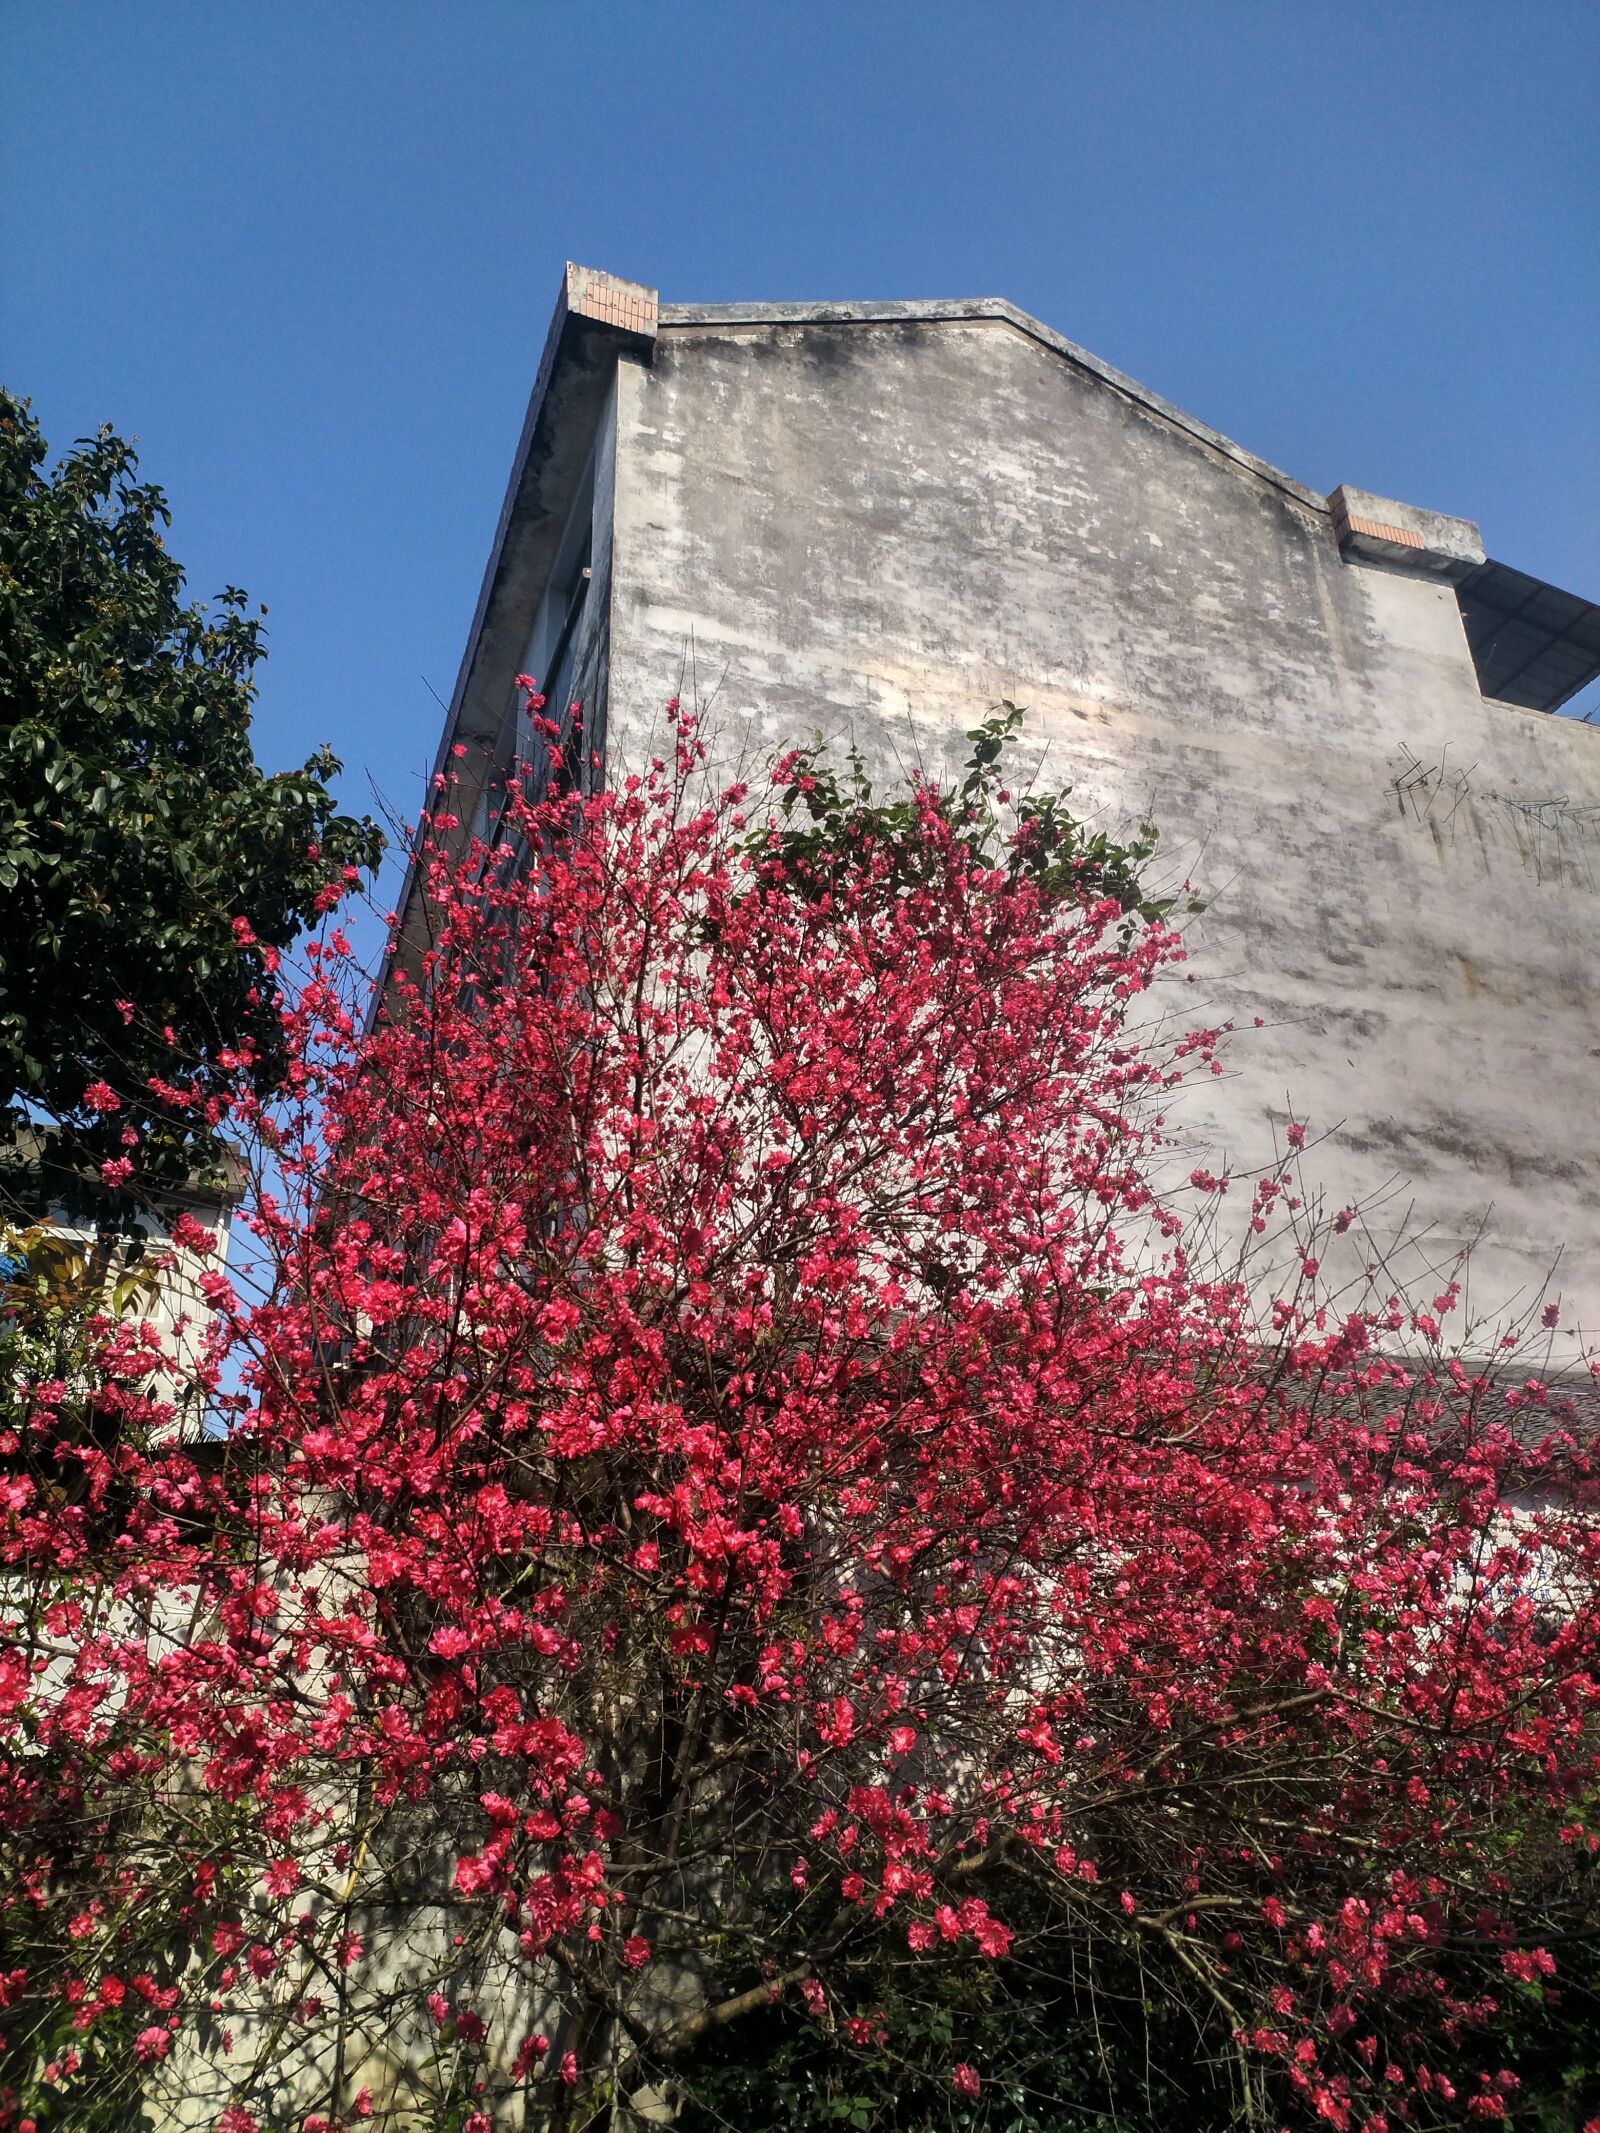 Xiaomi MI 5s Plus sample photo. Flower, building, red photography